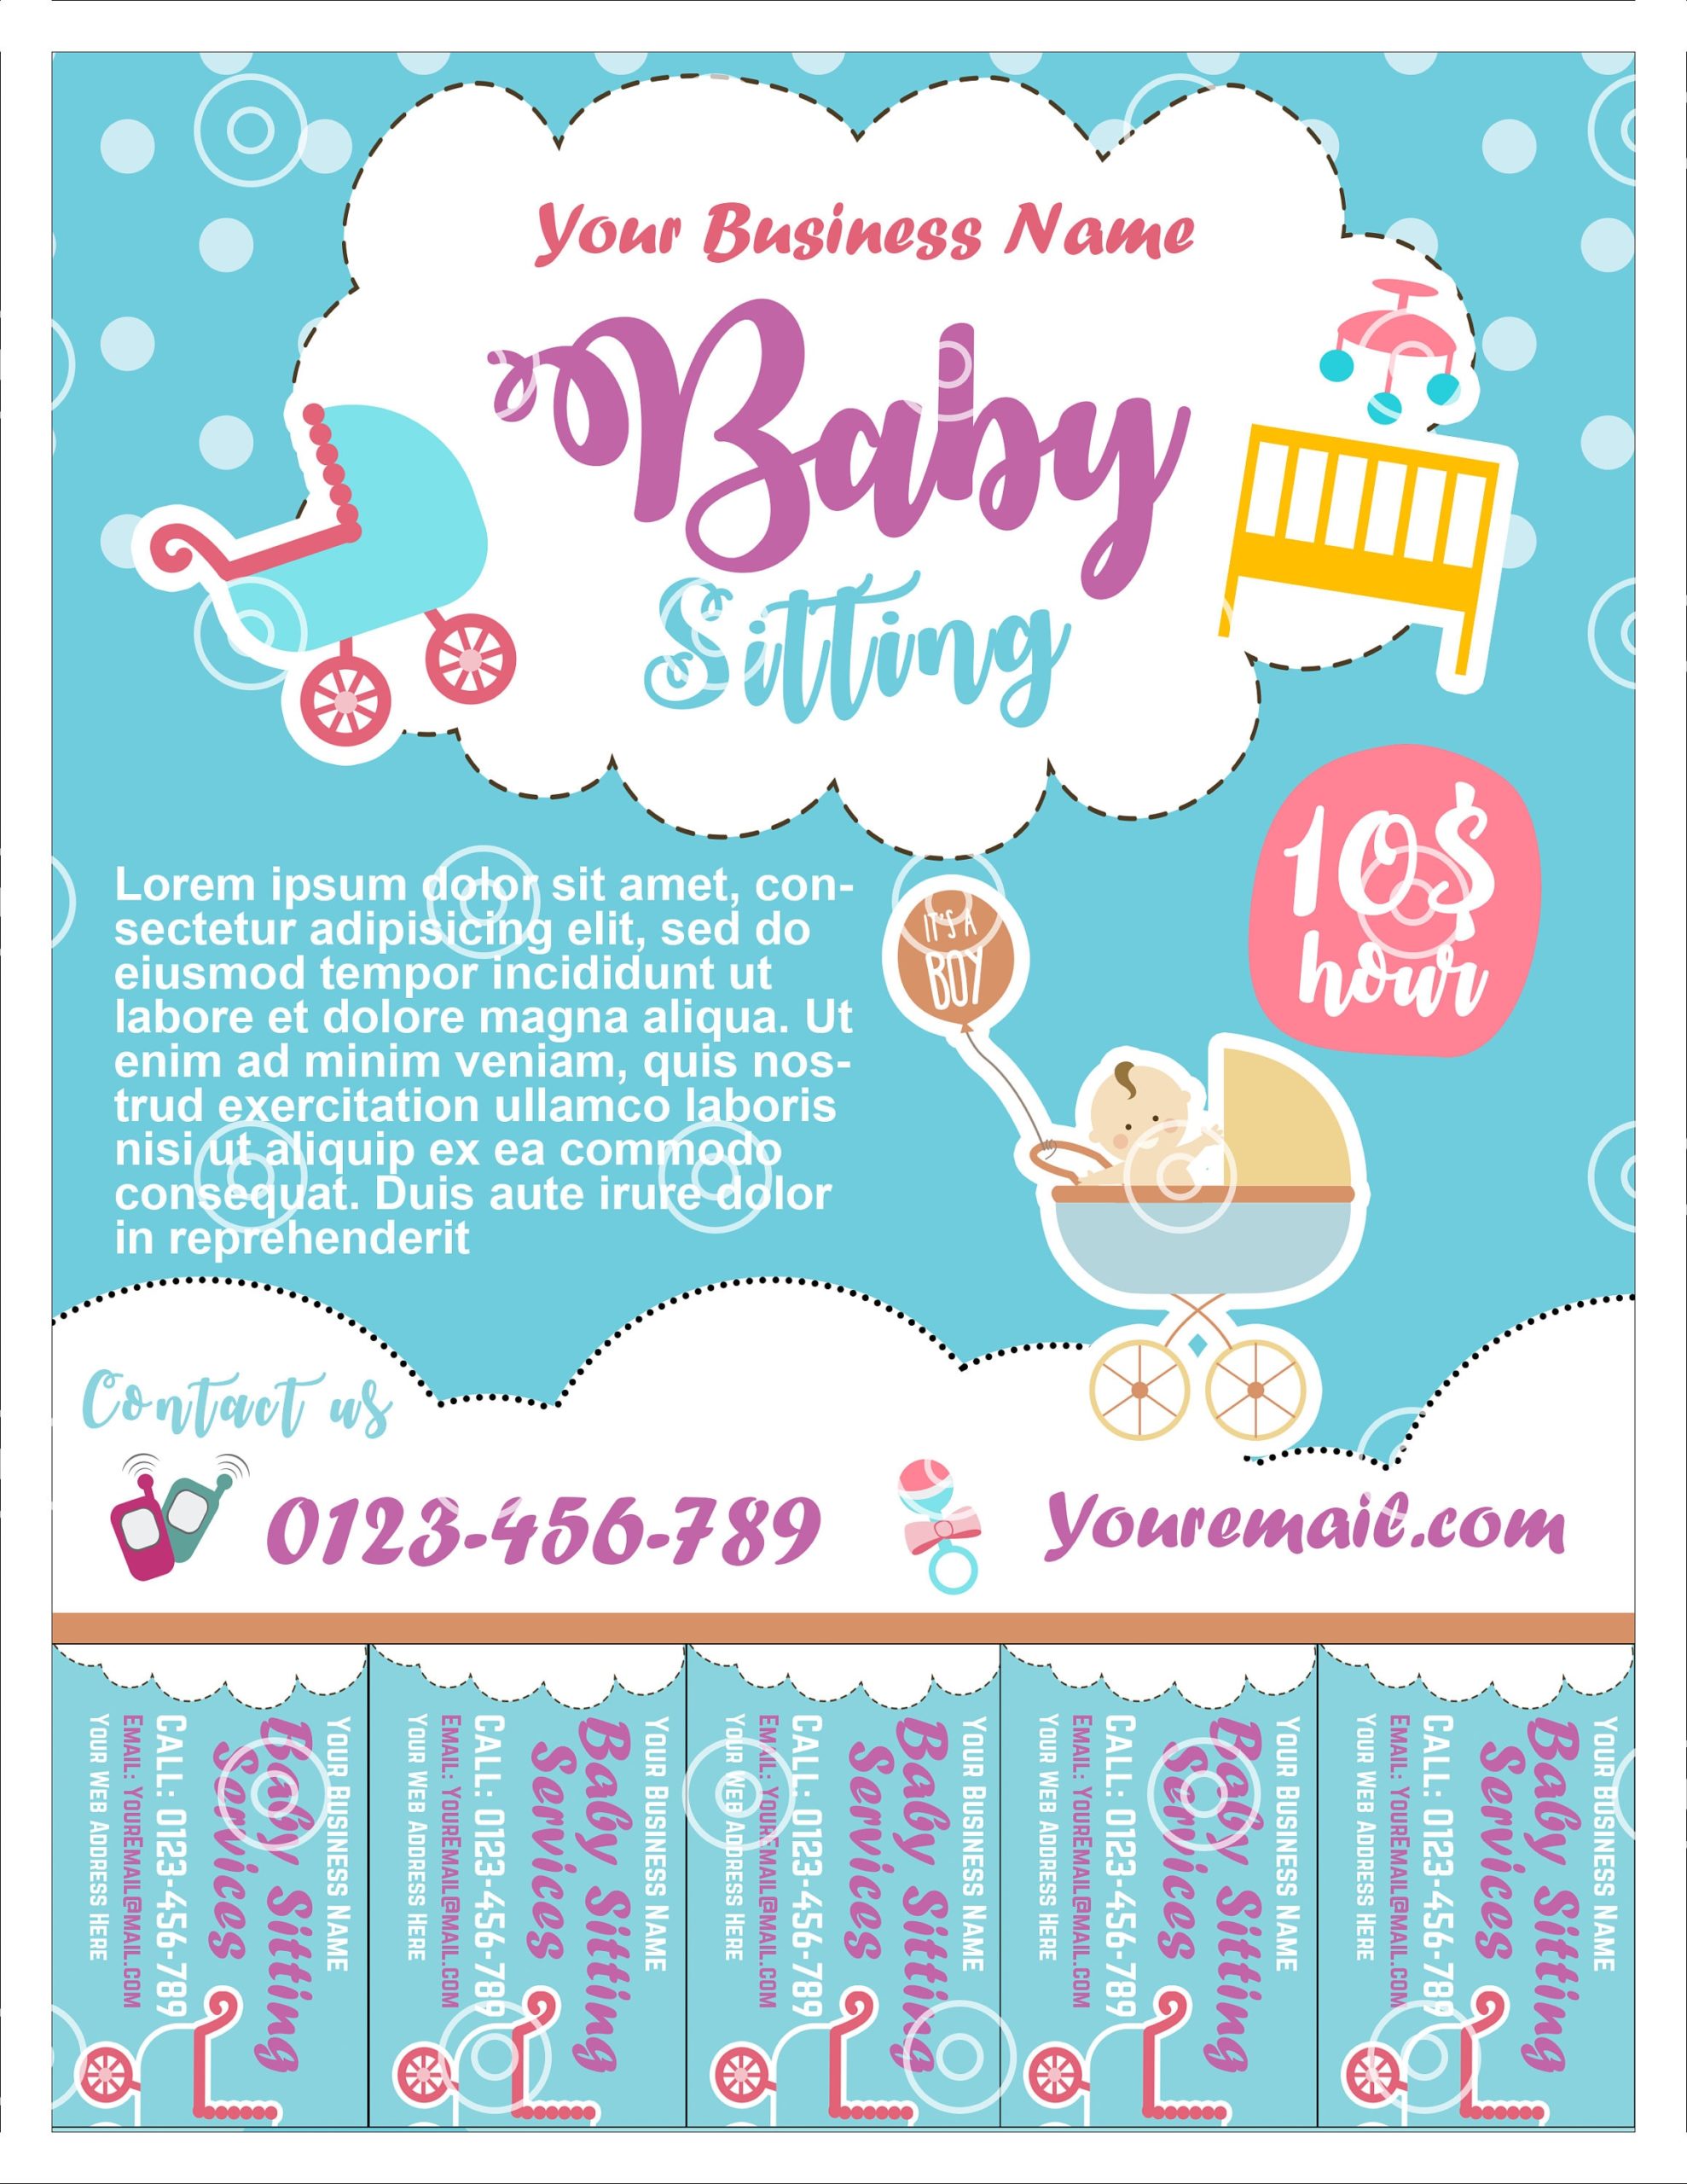 babysitting business cards examples 2